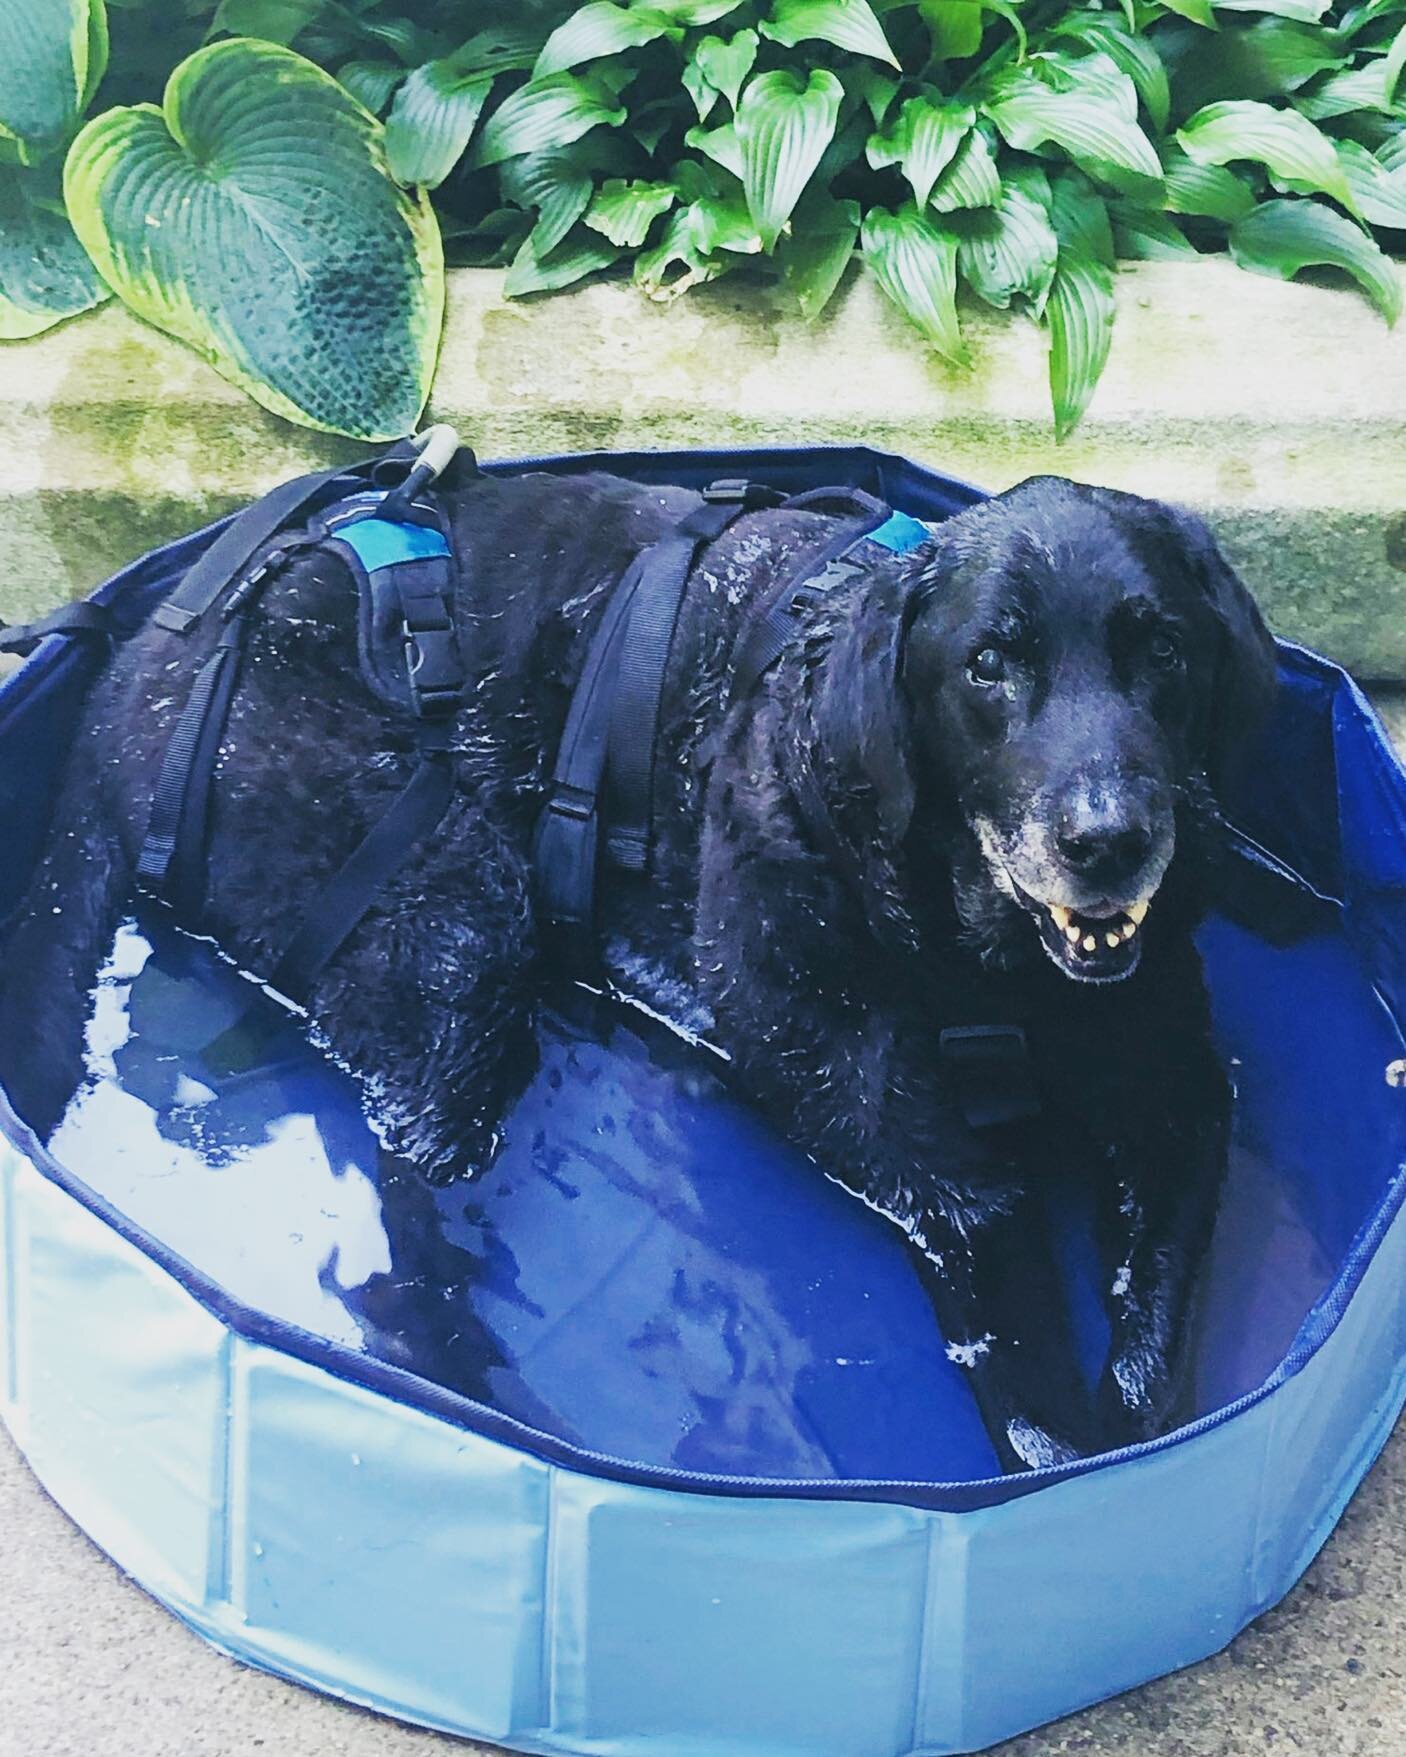 This is ME in my POOLIE when I was 14. How are all you DOGS staying cool today?
💧💦🐾
When my old boy @woodrowonthebench was 14 &amp; living with congestive heart disease, our building maintenance guy &amp; our neighbors helped us set up this pool f